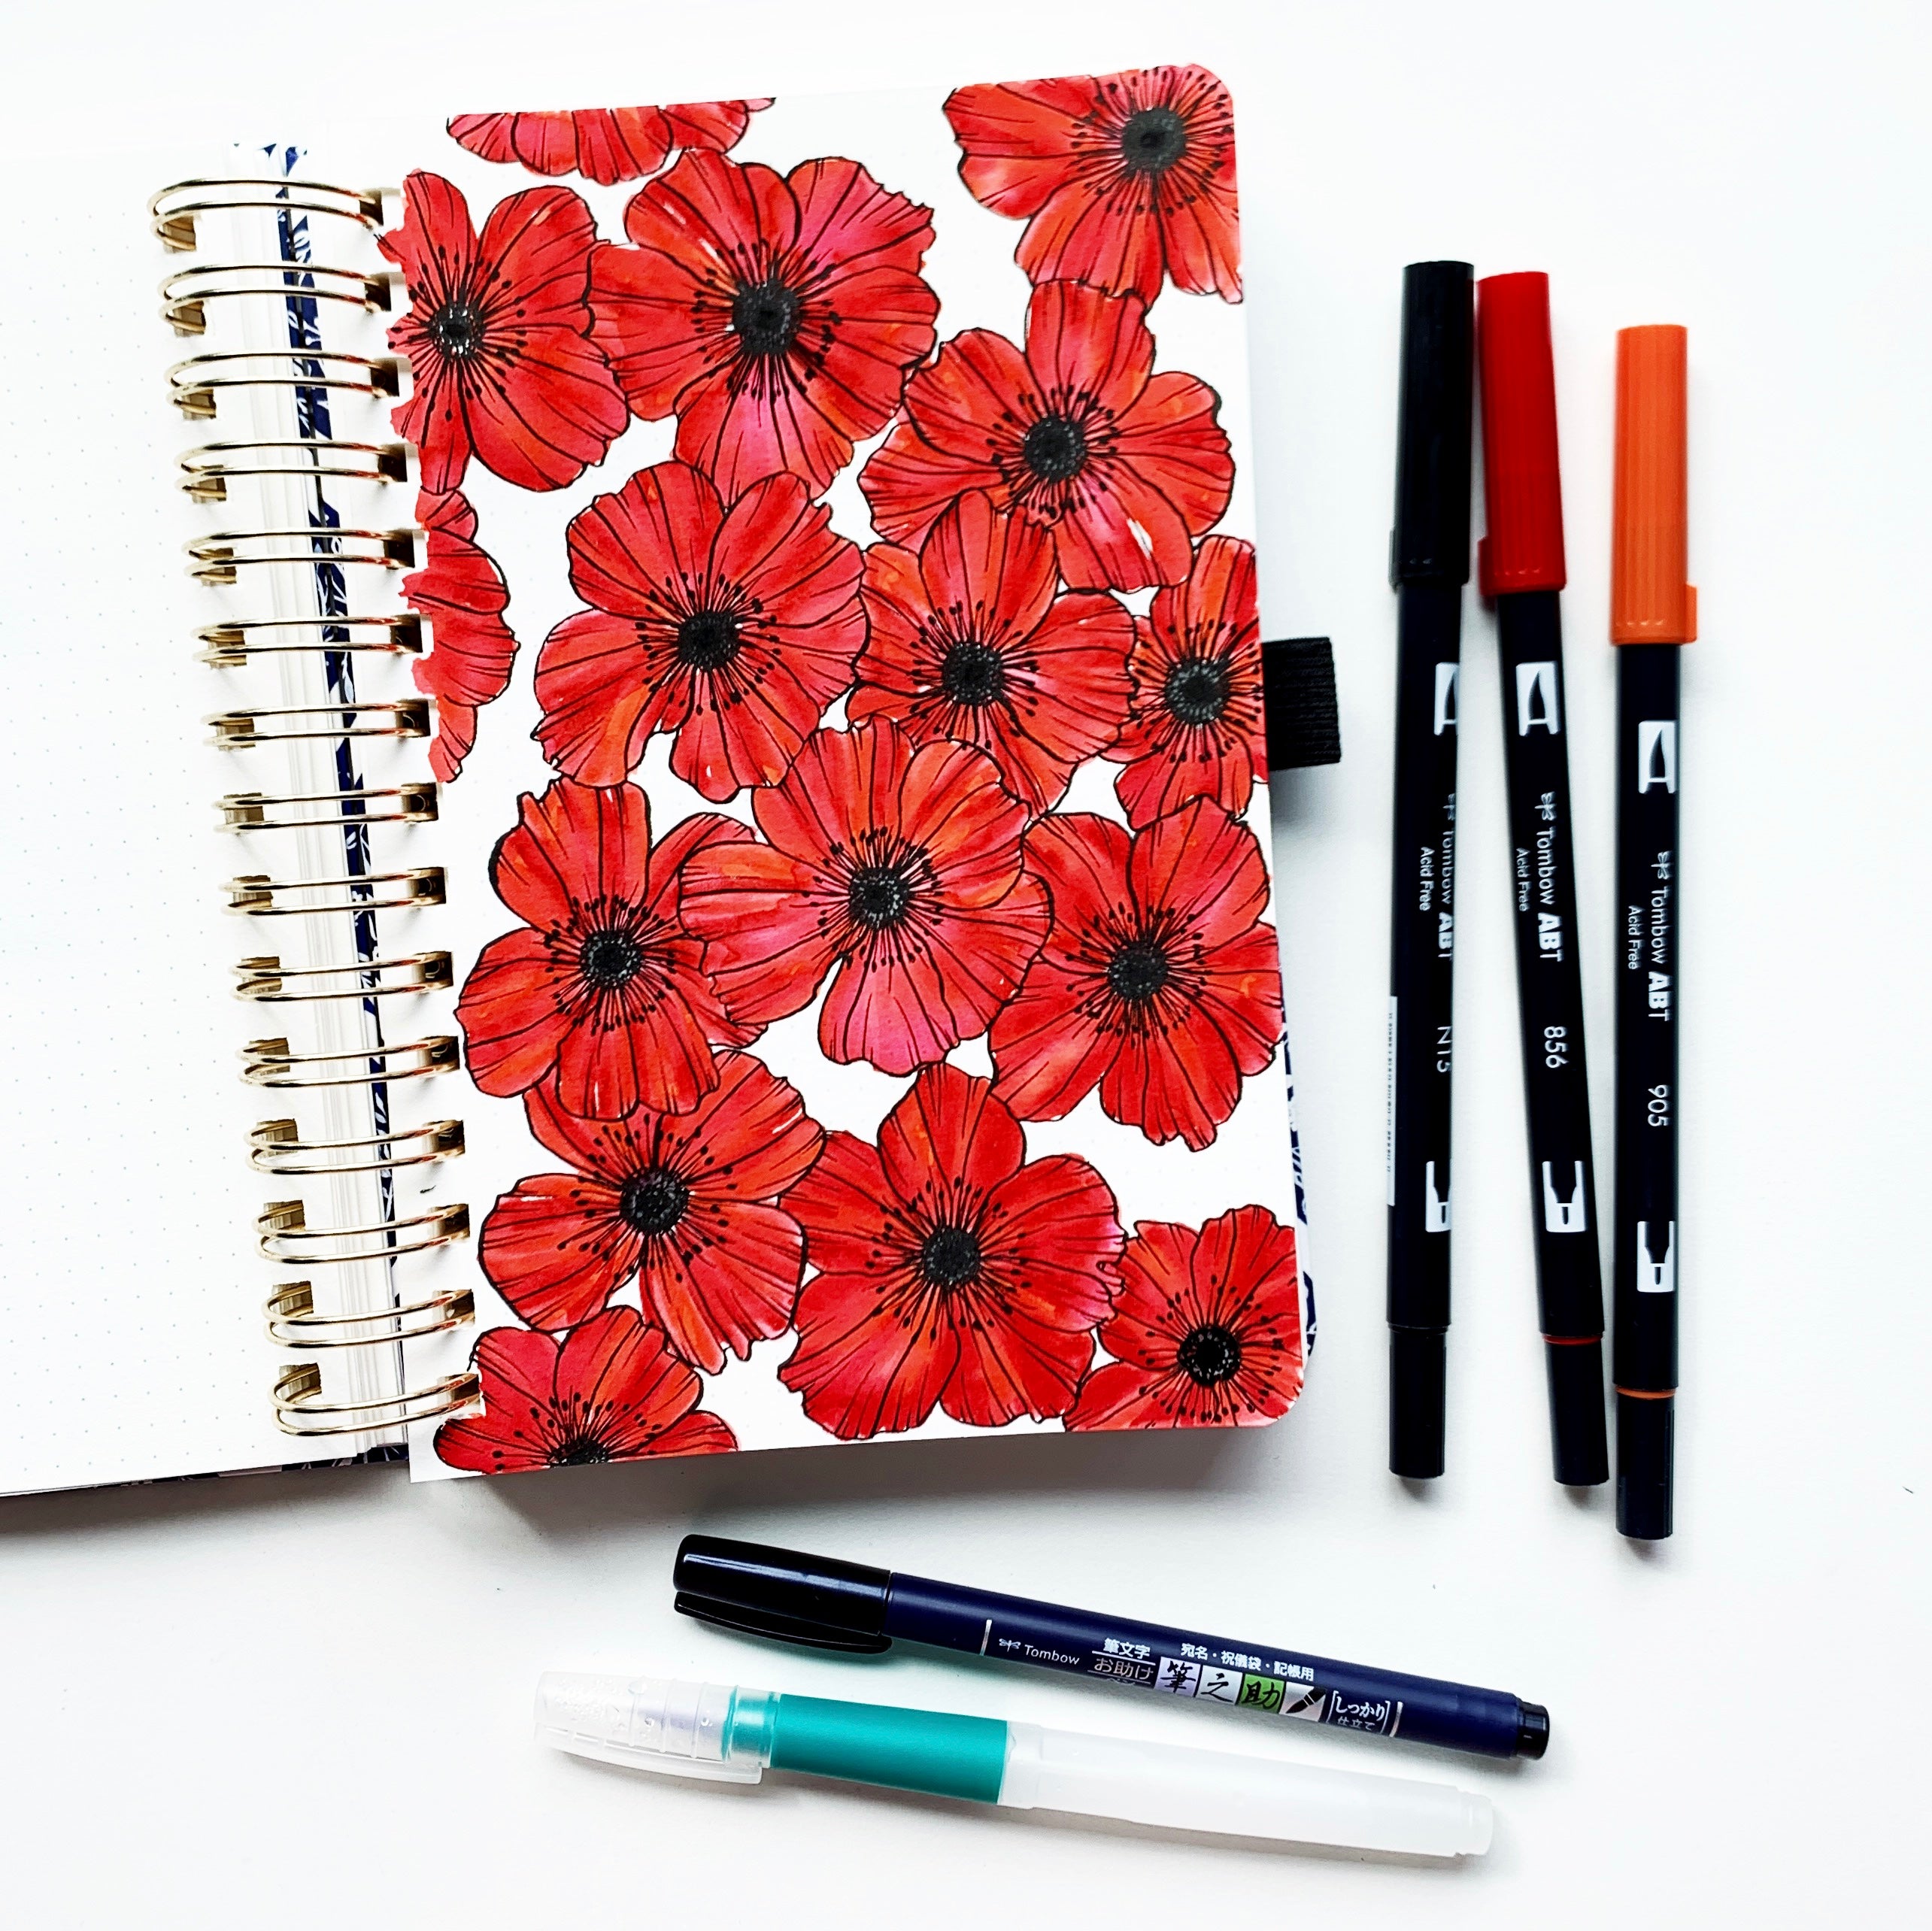 Learn how to draw and illustrate poppies with Adrienne from @studio80design!